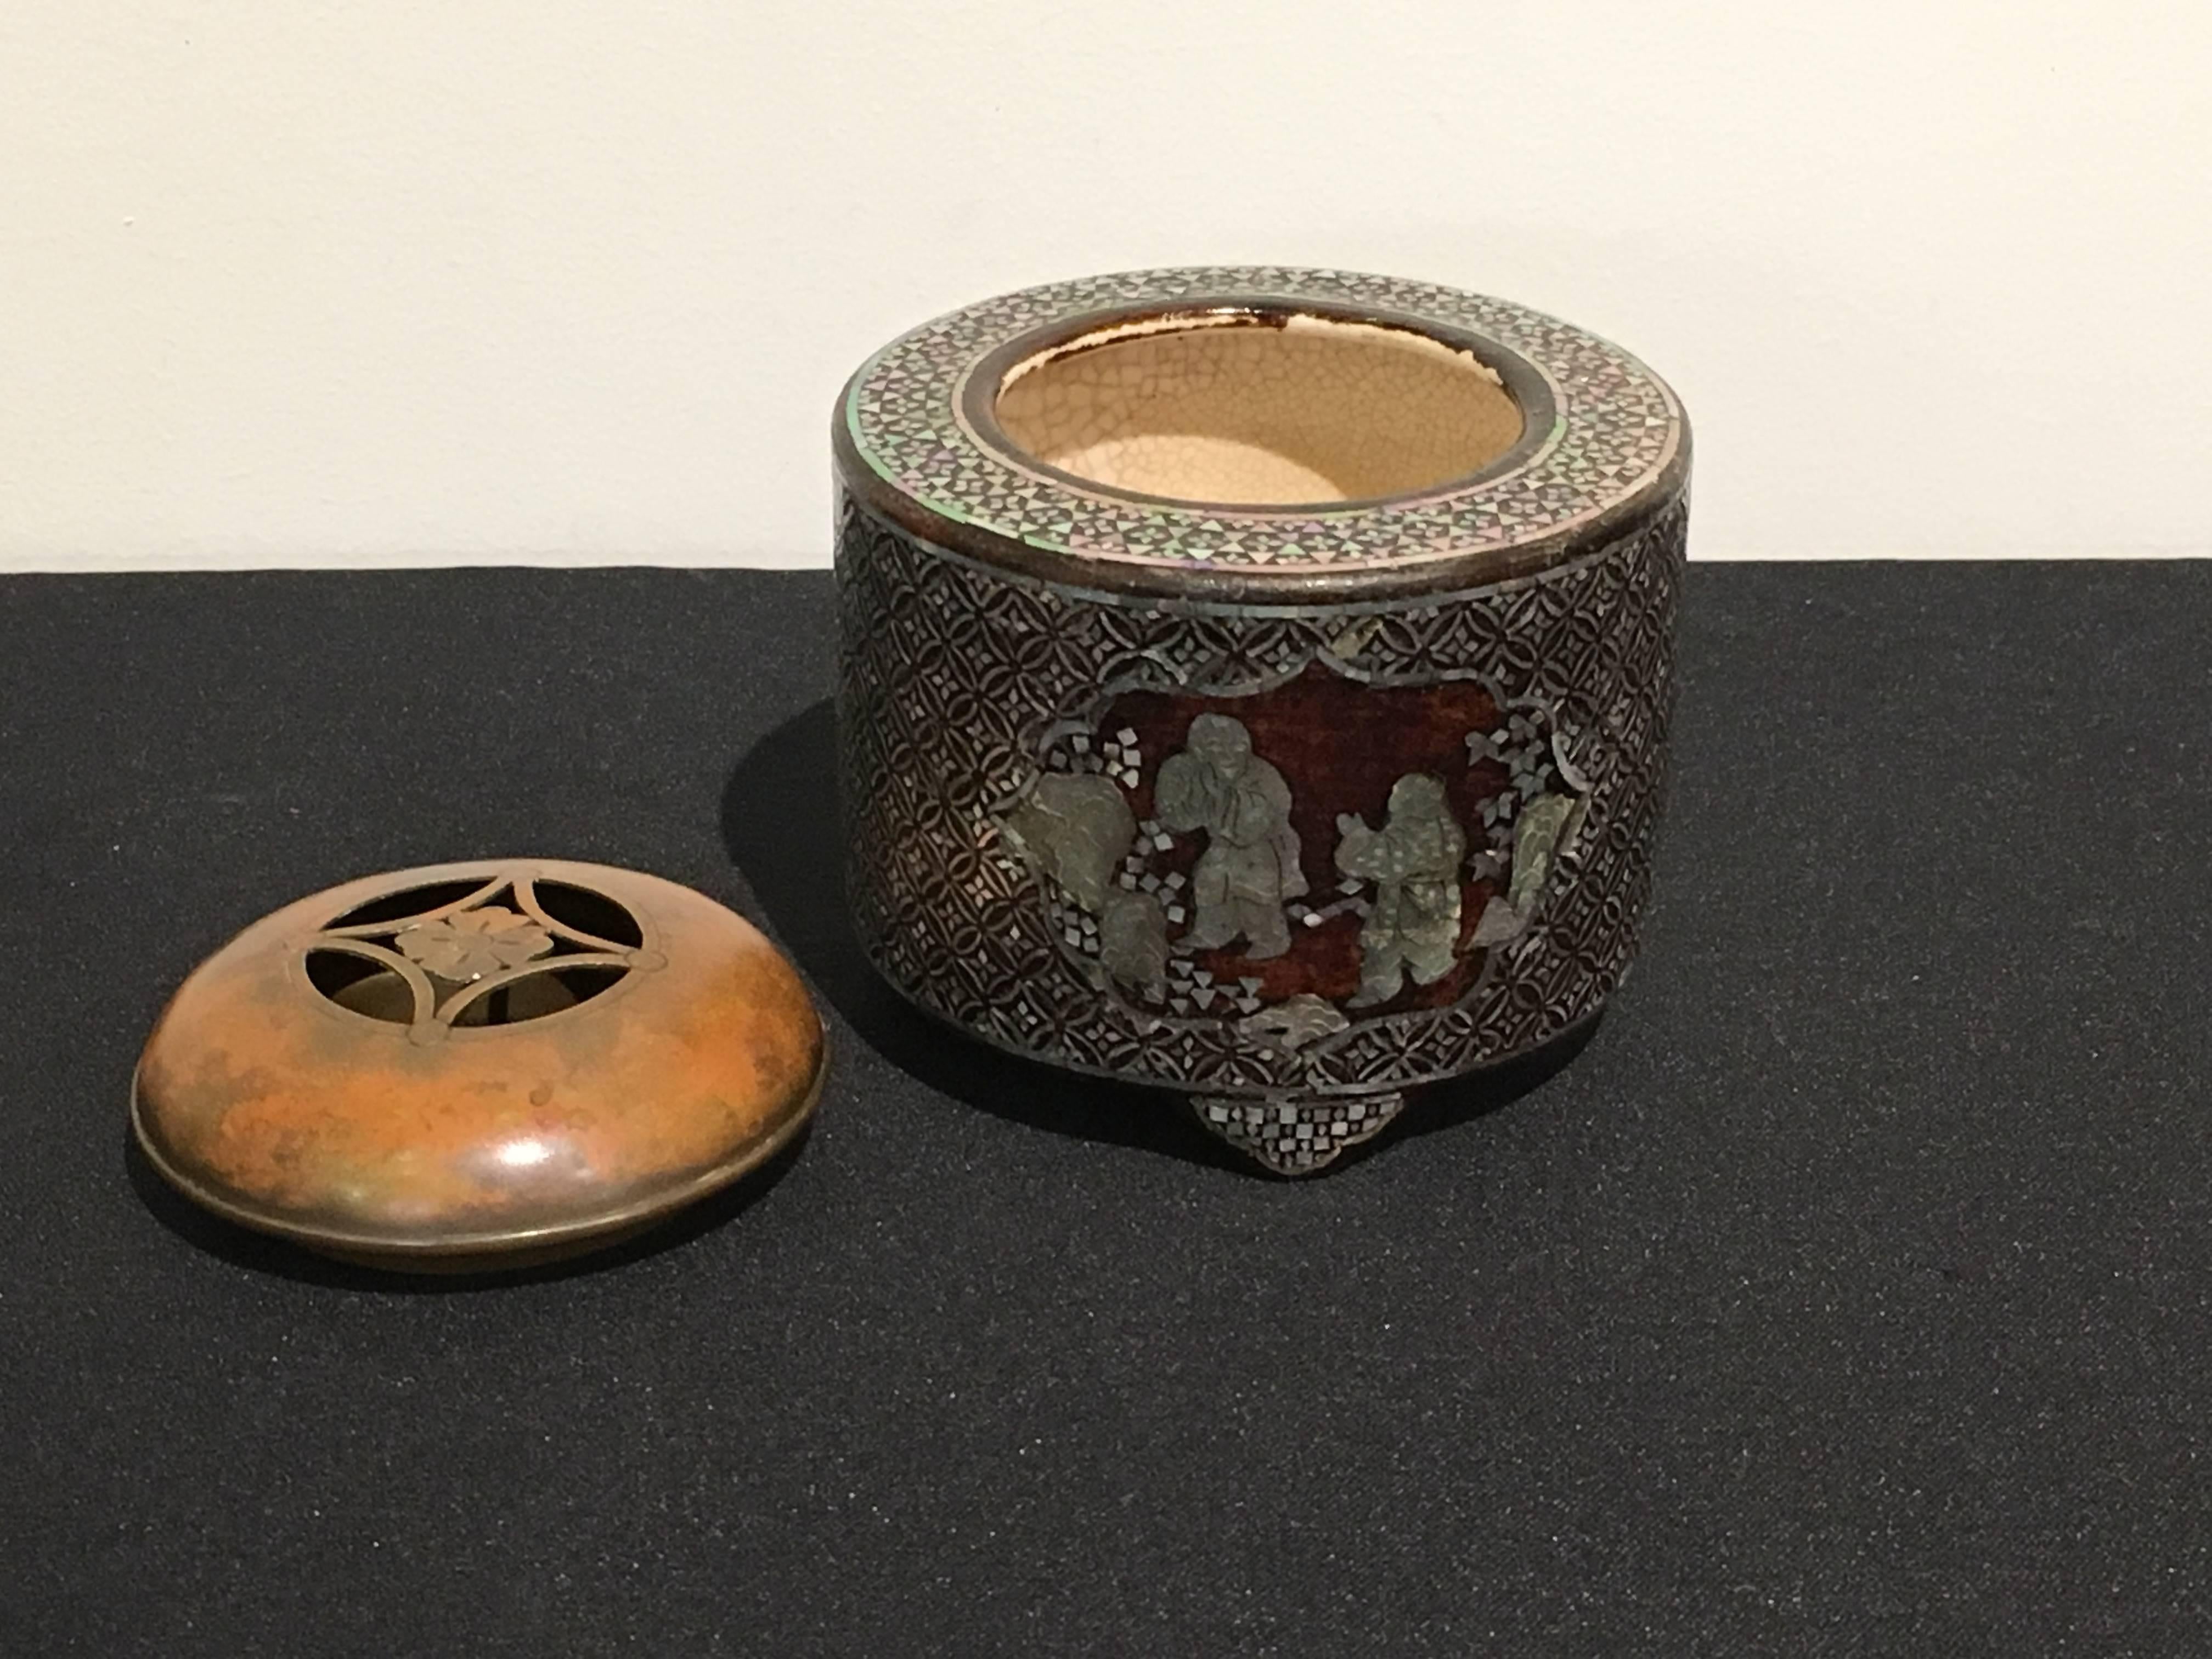 Glazed Japanese Edo Period Lacquer and Mother-of-Pearl Embellished Stoneware Koro For Sale